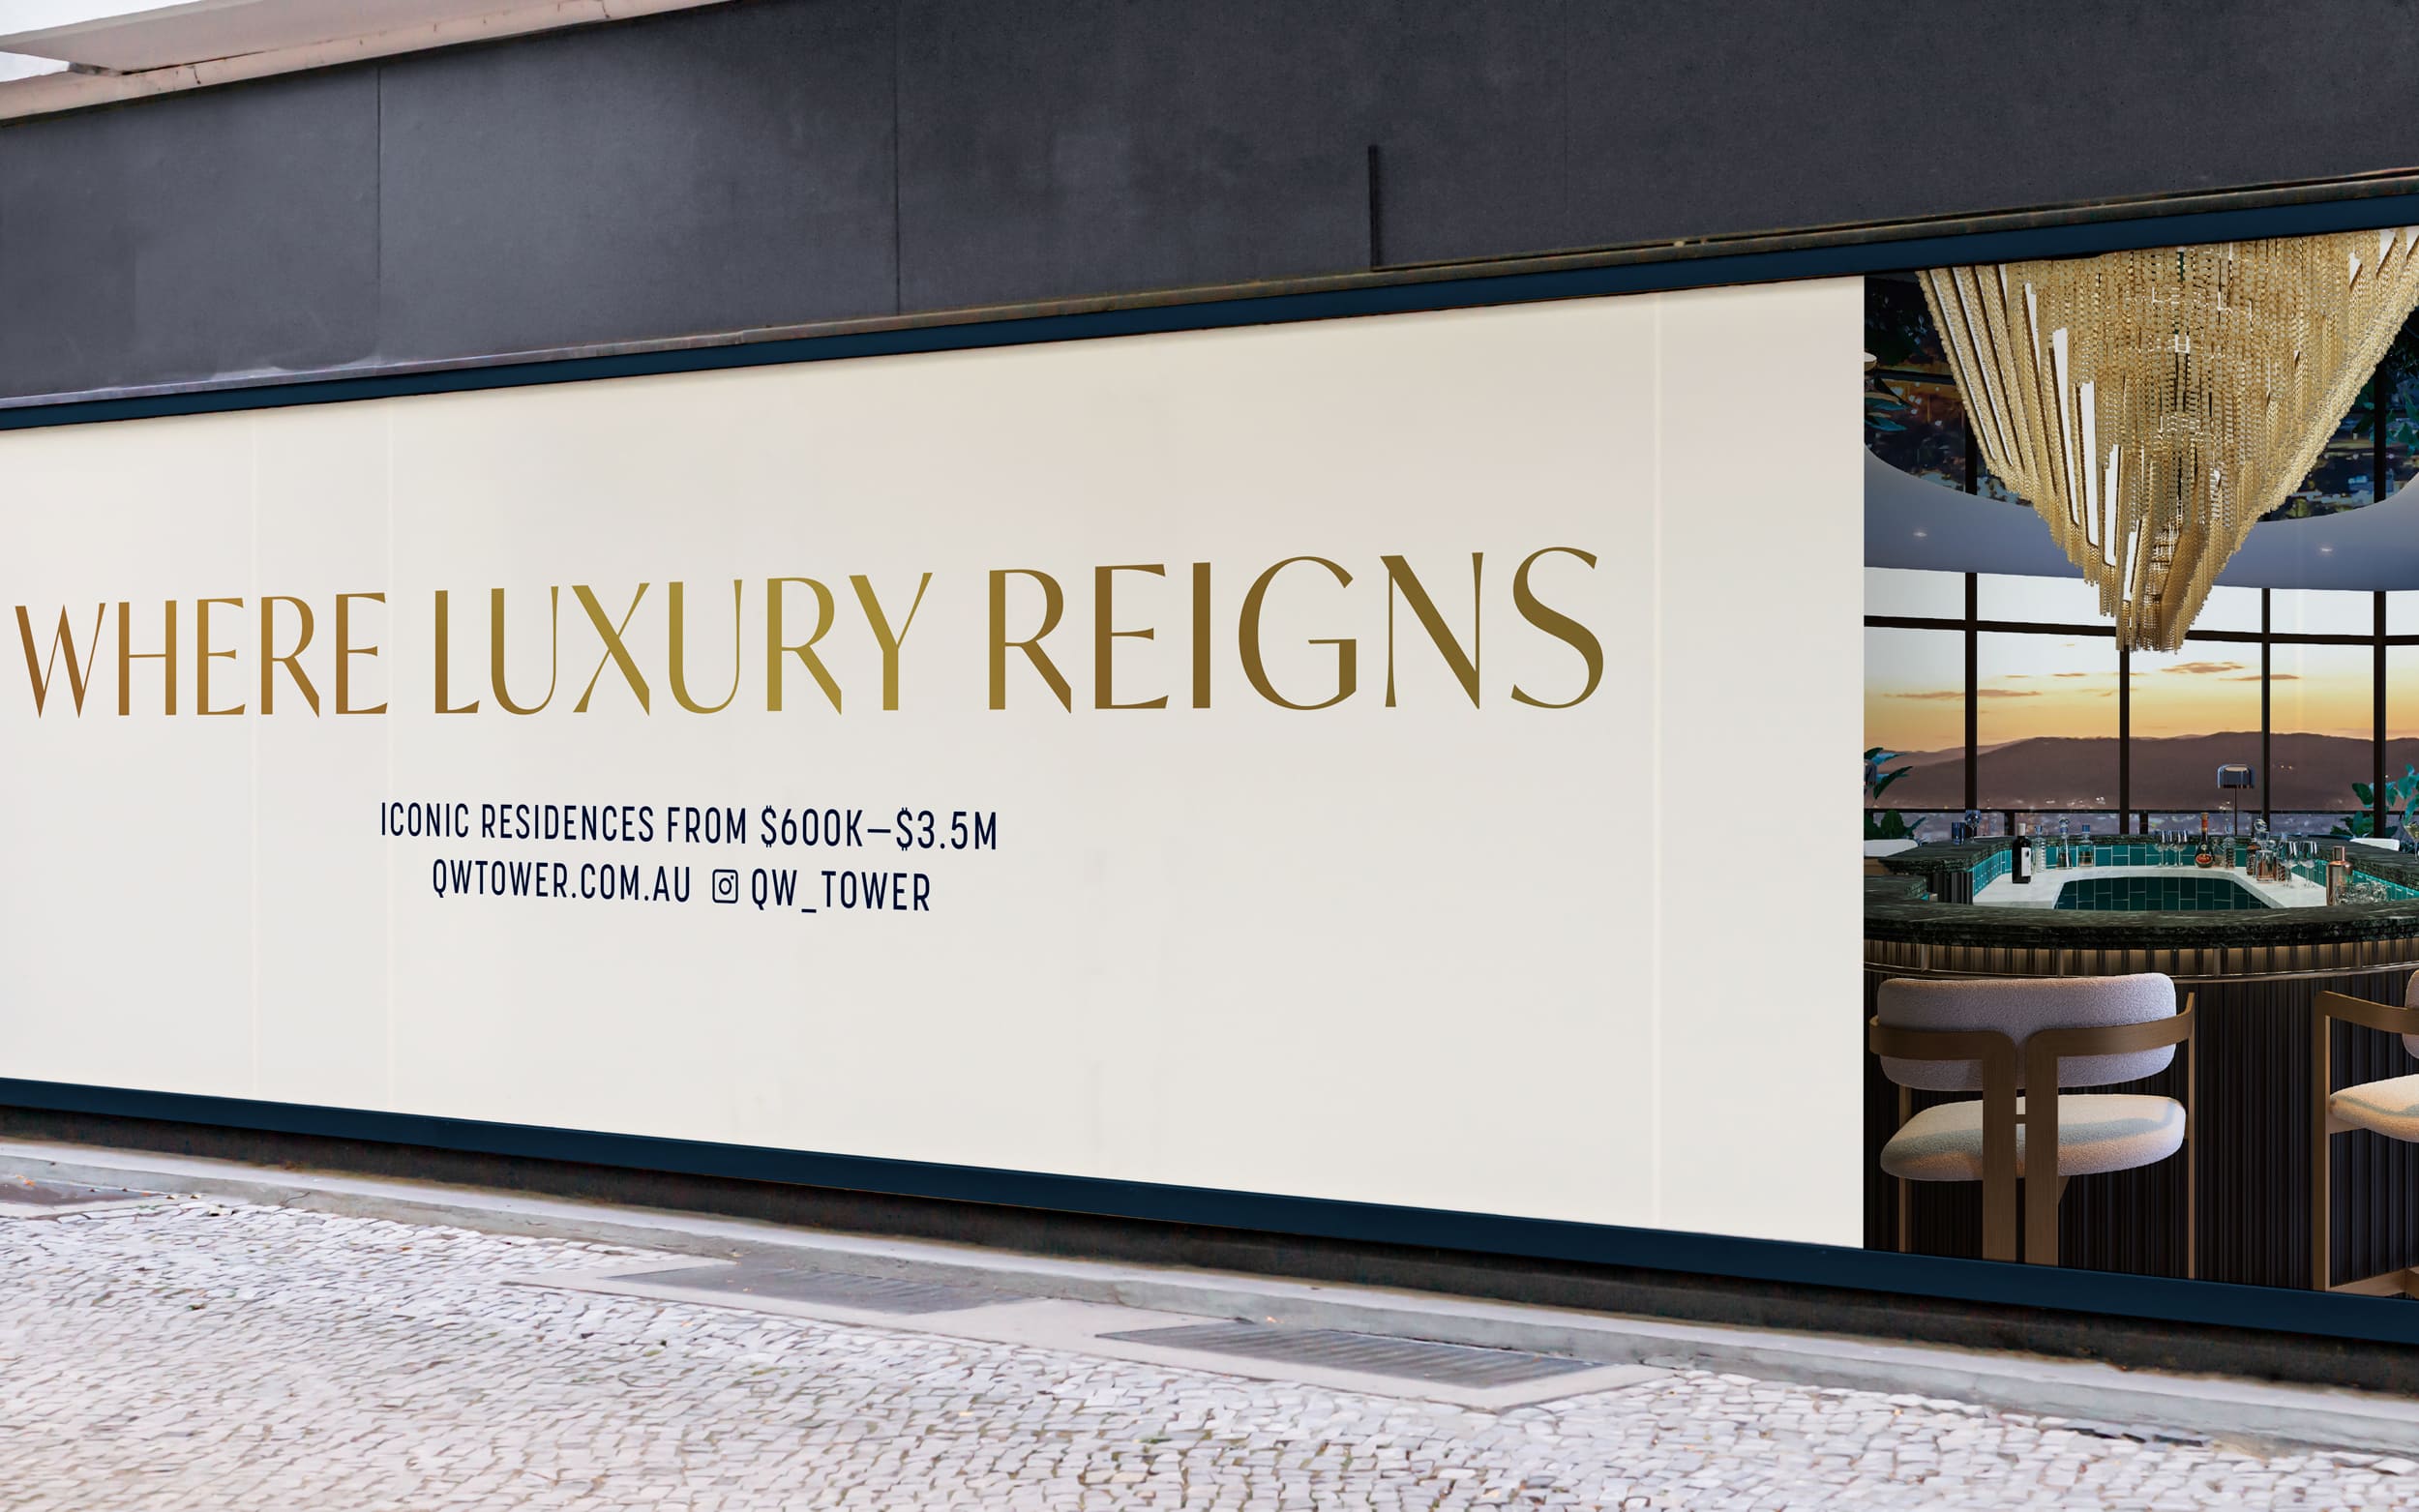 QWT hoarding - where luxury reigns